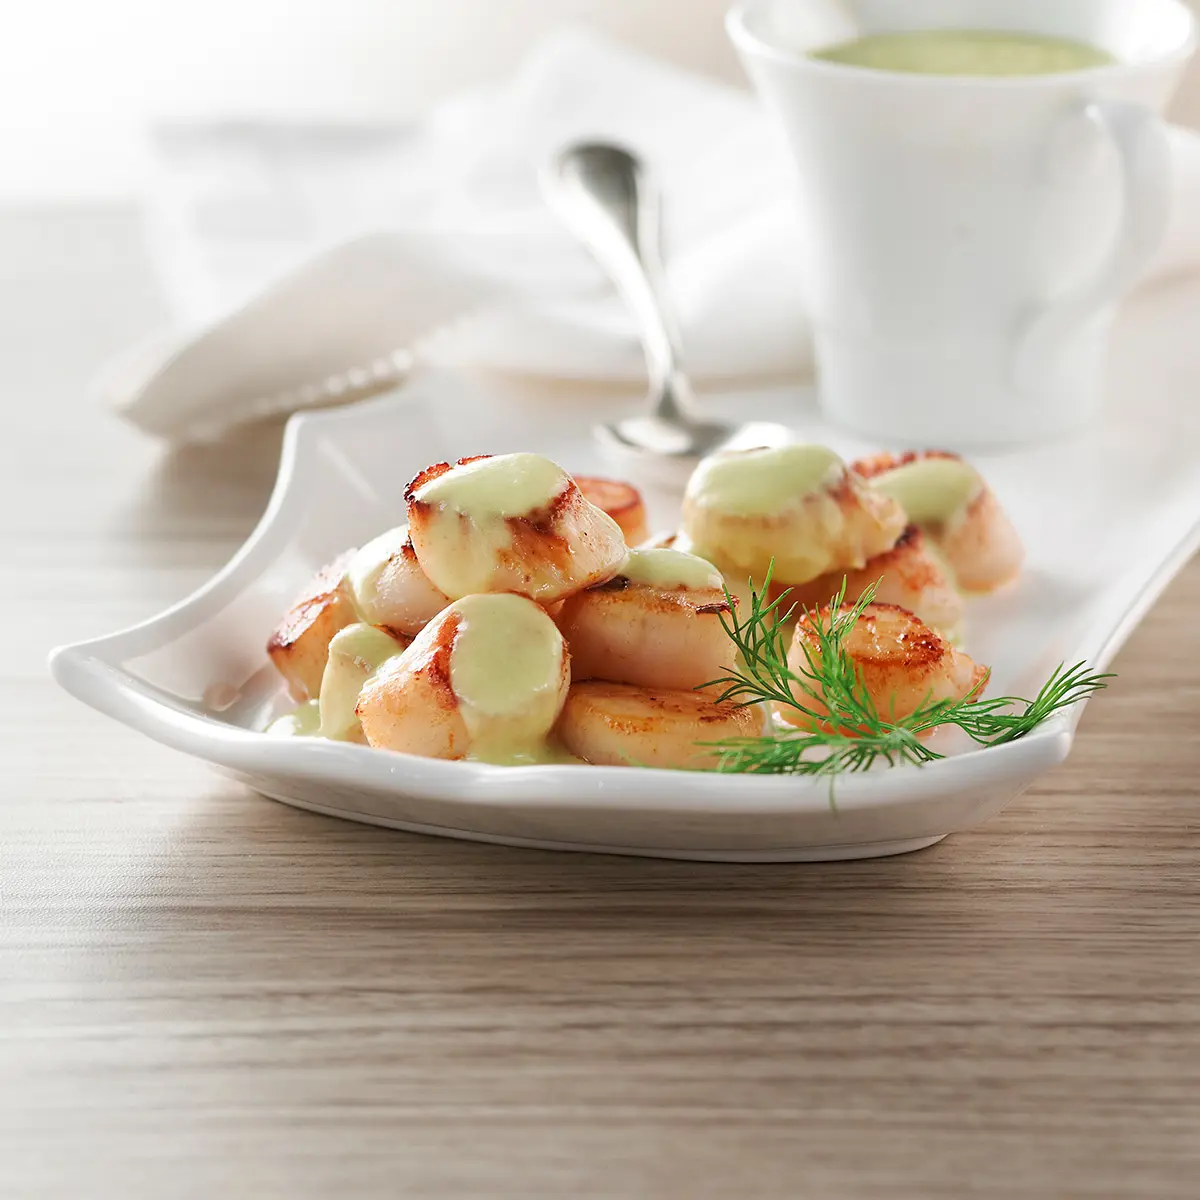 Unilateral scallops with leeks cream